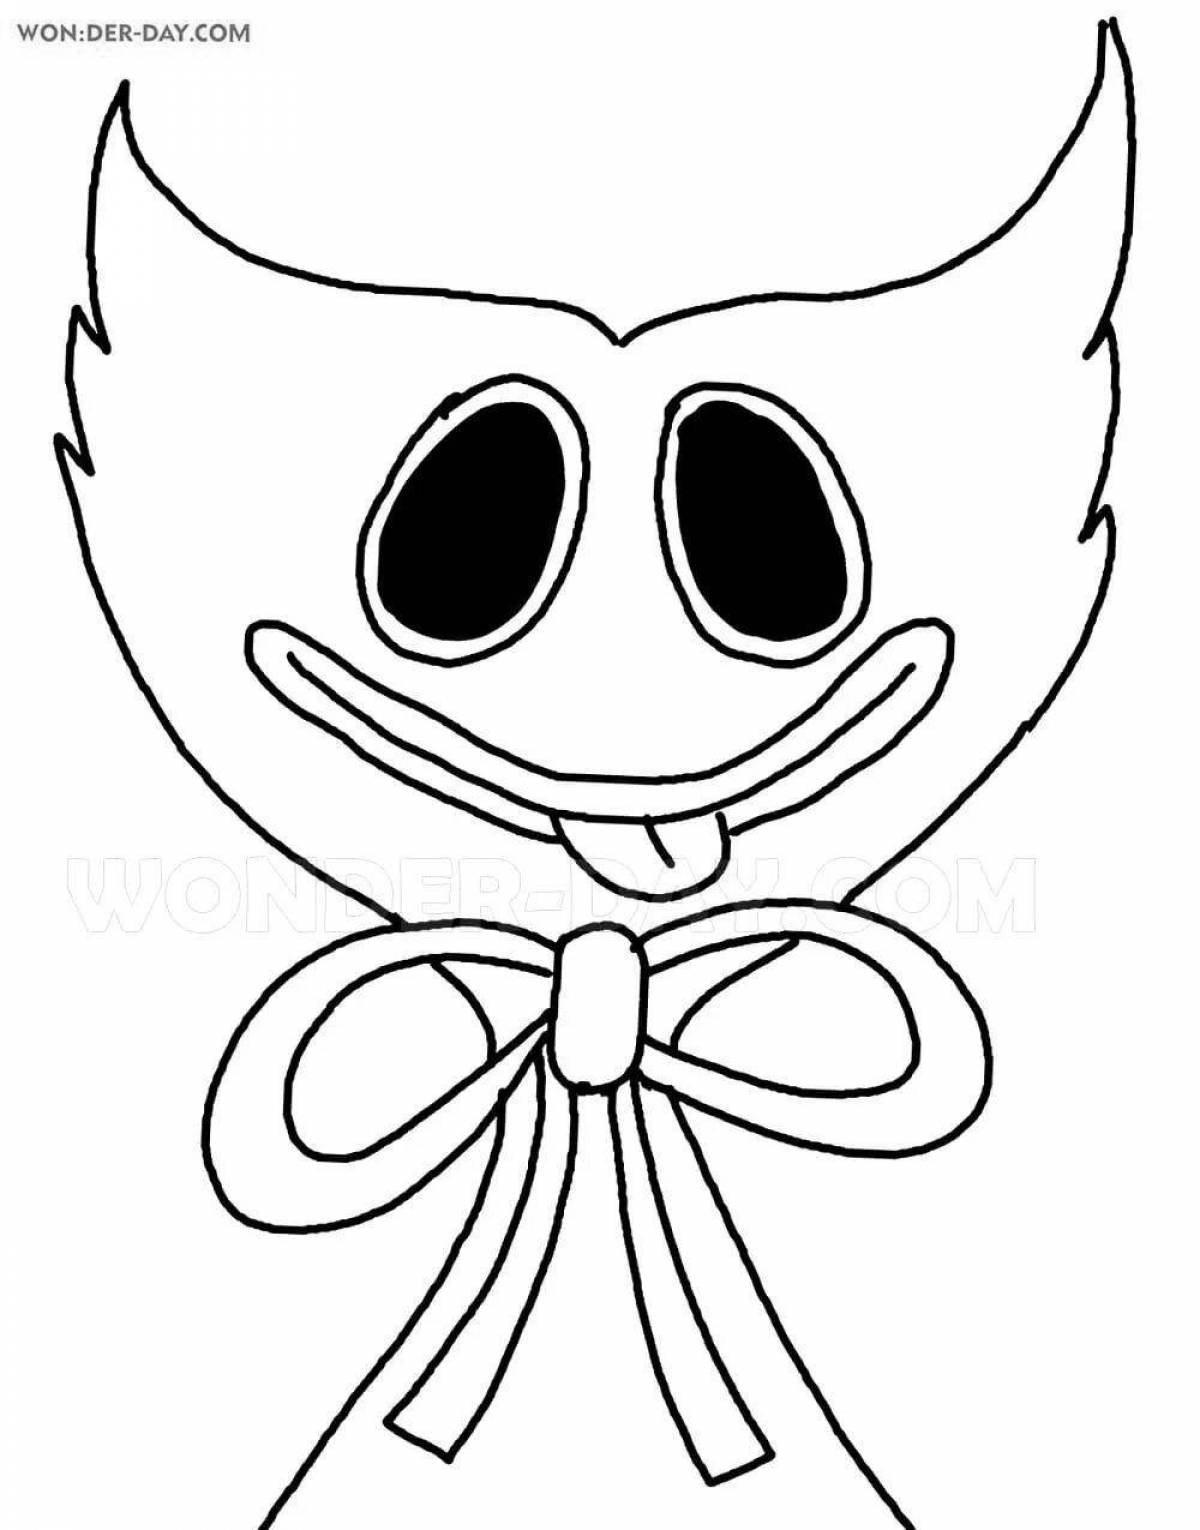 Coloring page adorable poppy play time